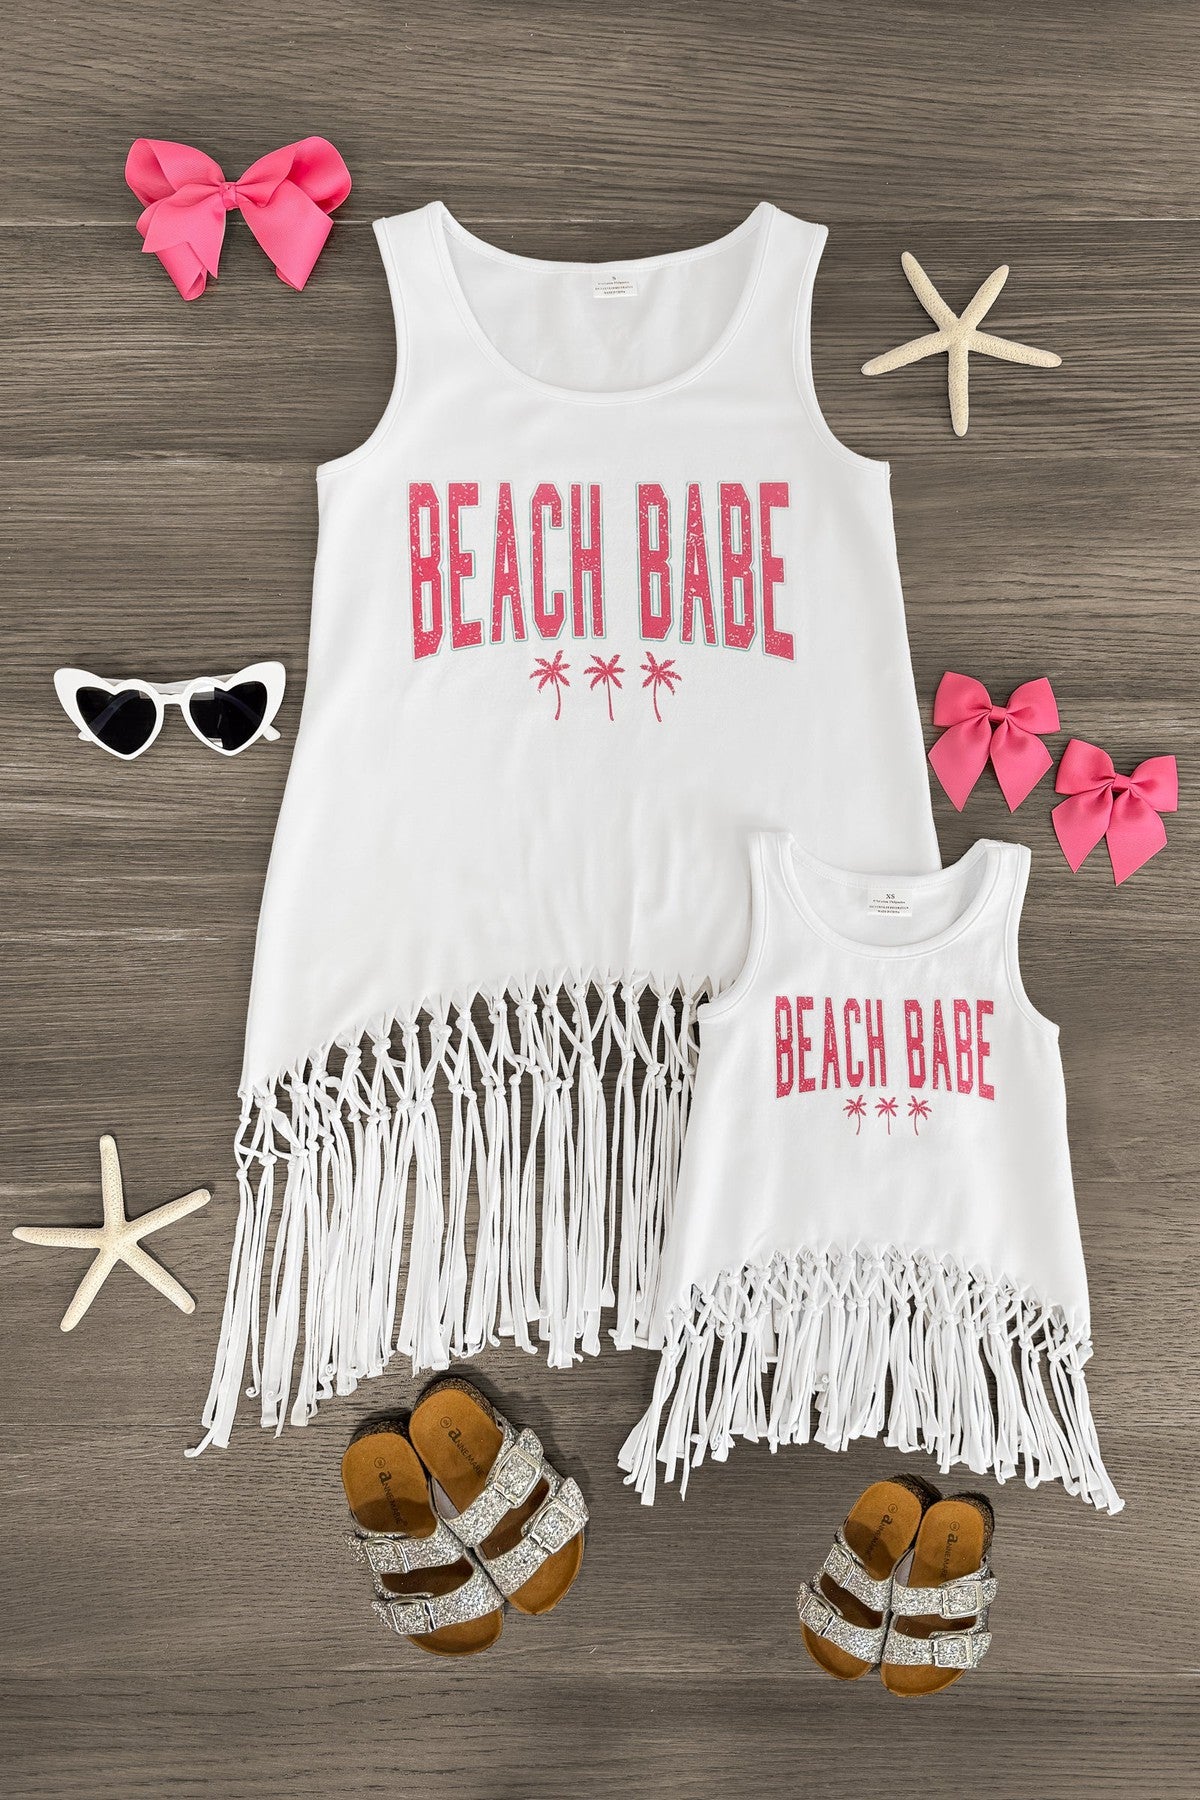 Mom & Me - "Beach Babe" Fringe Tank Top - Sparkle in Pink